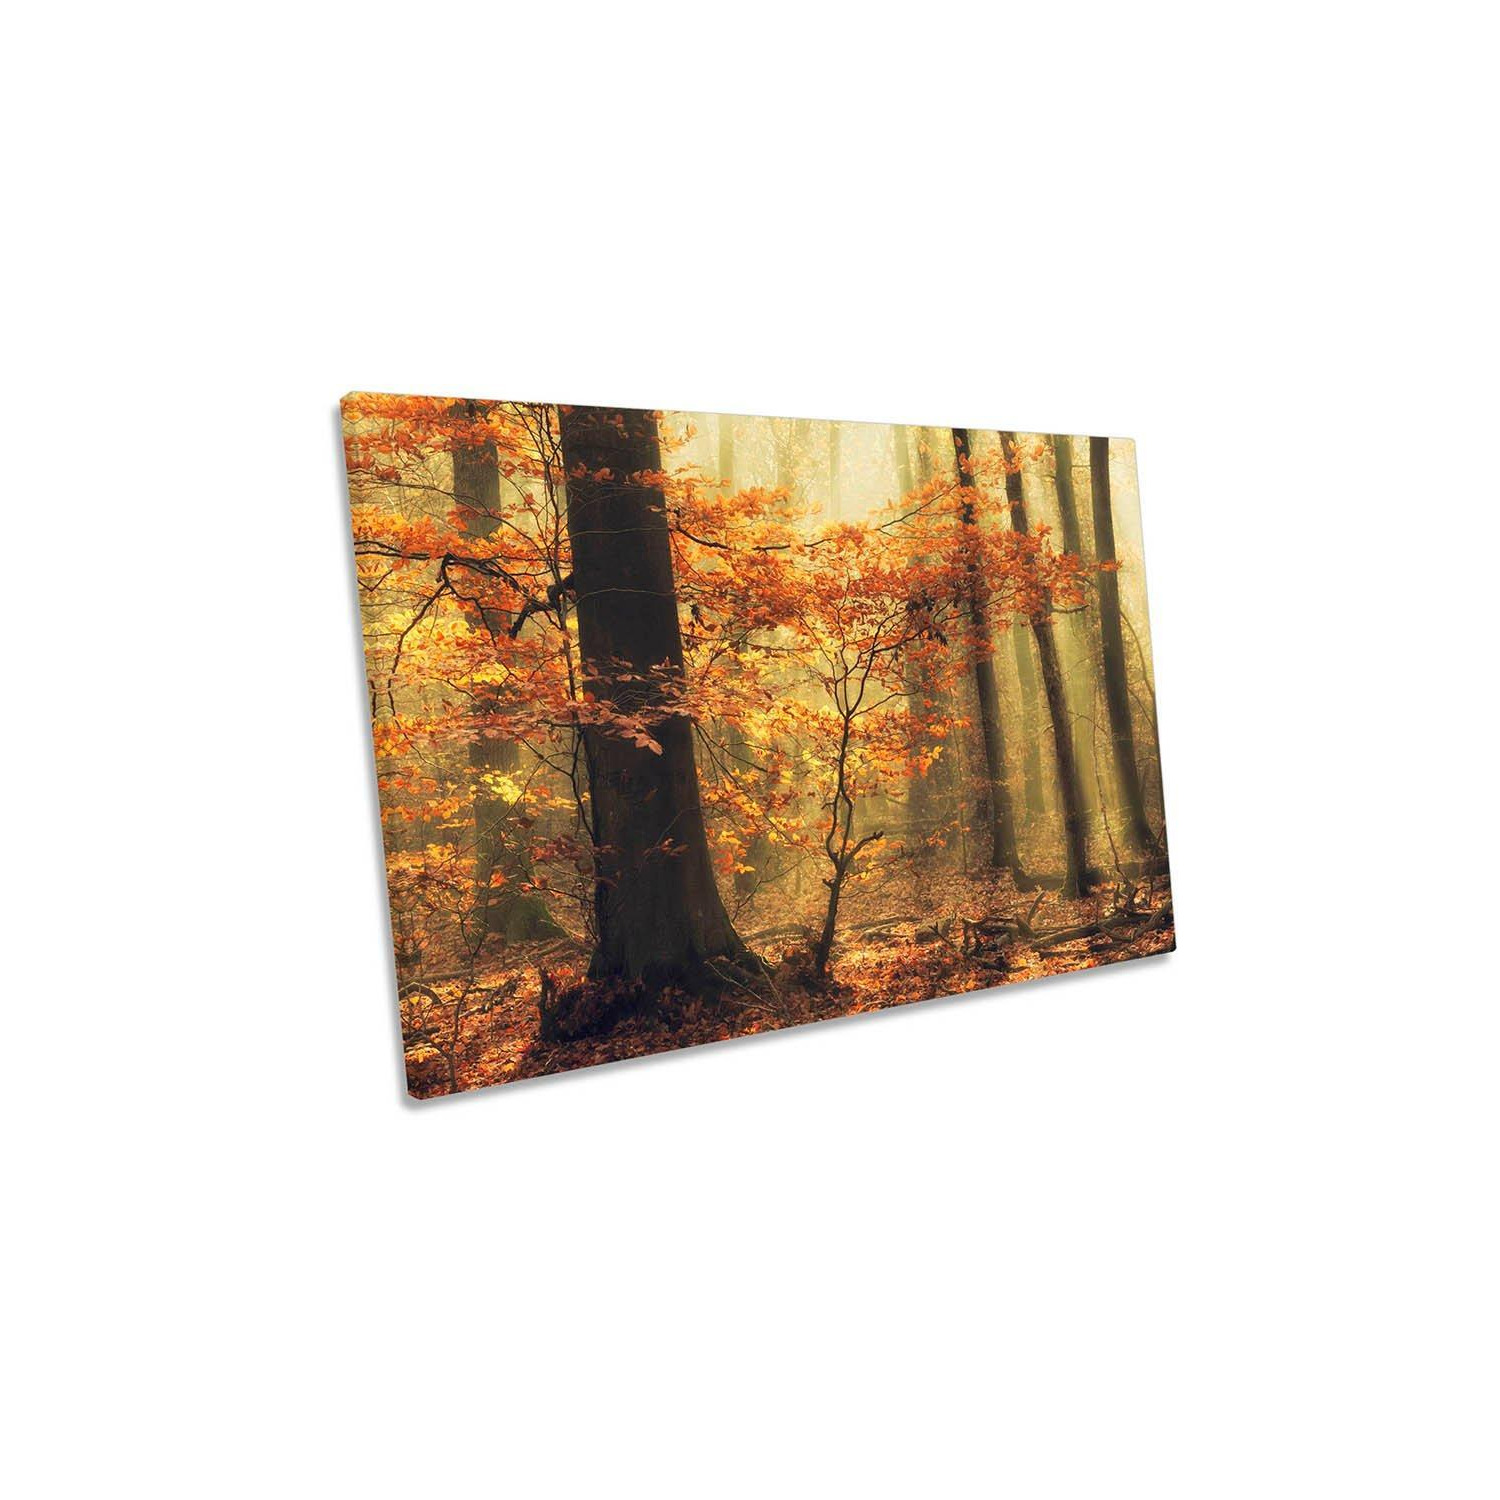 Orange Fall Autumn Forest Trees Canvas Wall Art Picture Print - image 1